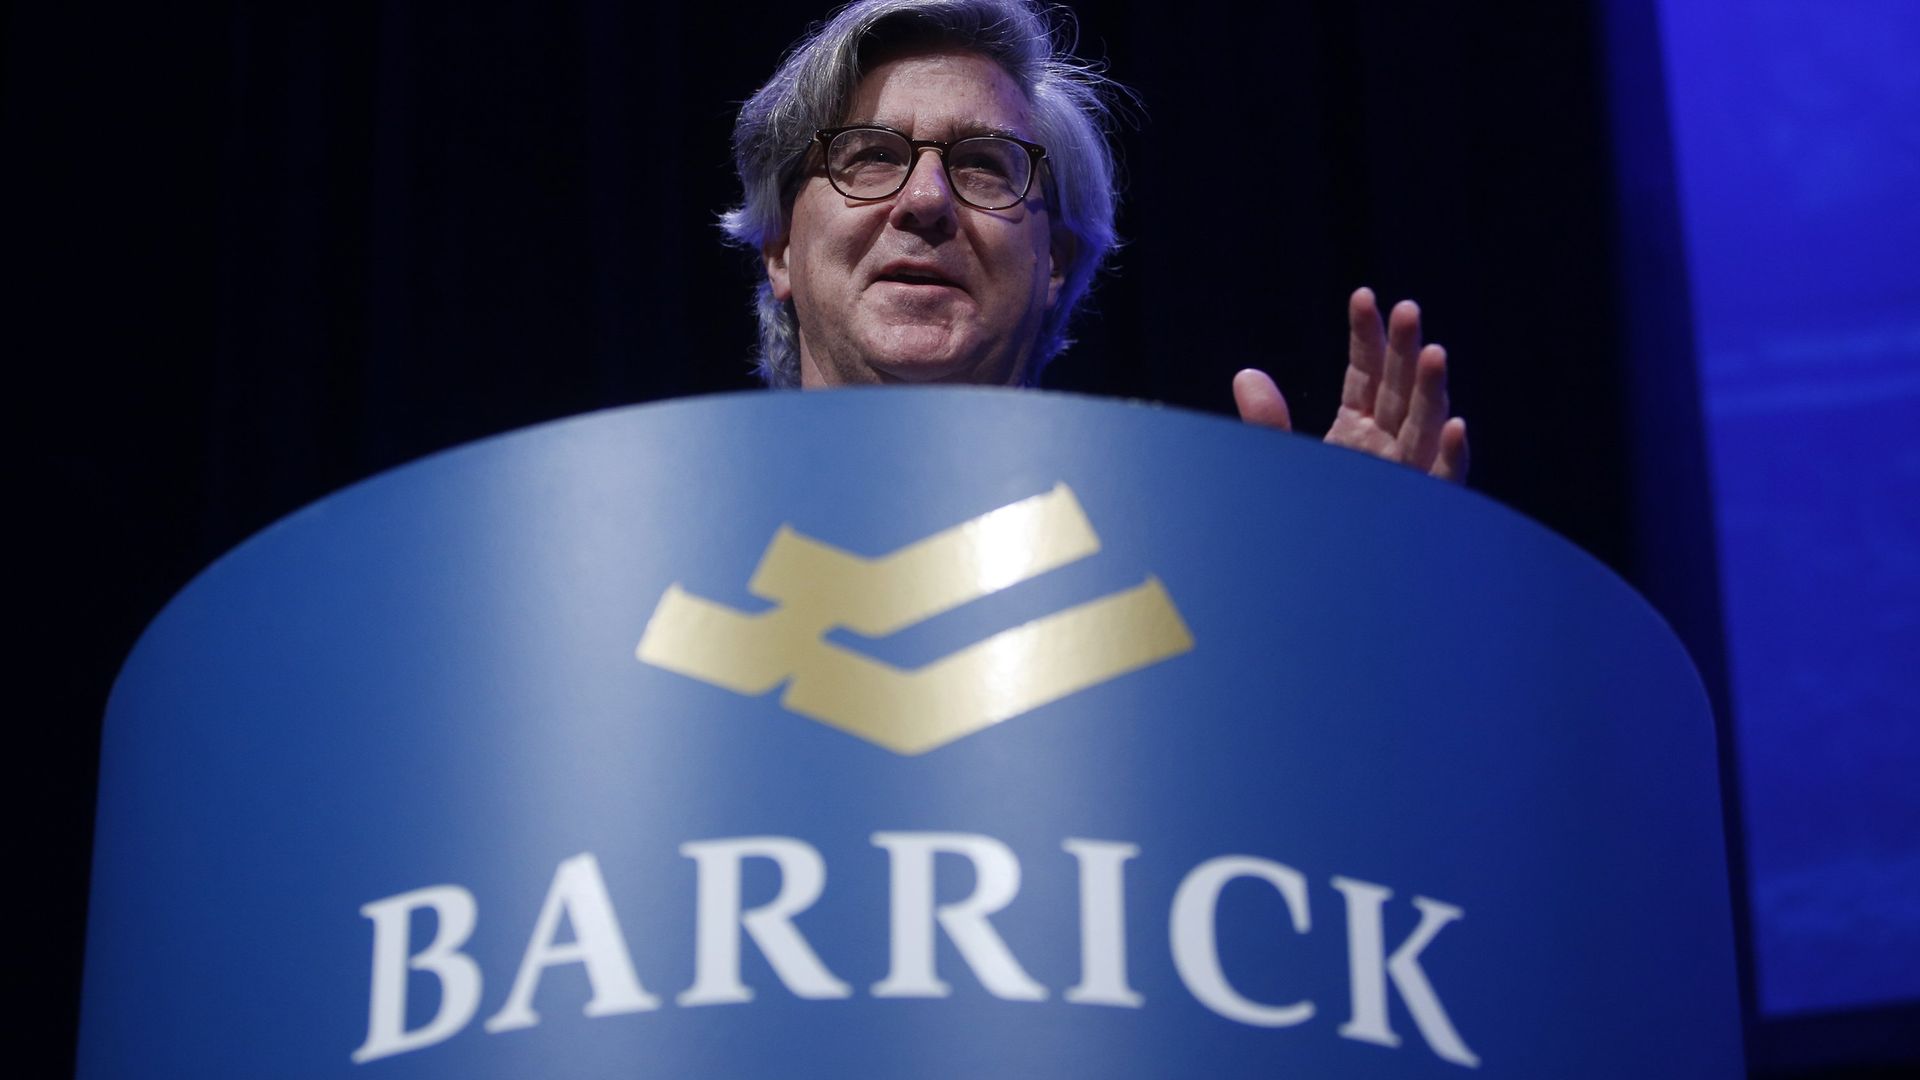 Barrick Gold Chariman John Thornton speaks during the Barrick Gold's Annual General Meeting at the Metro Toronto Convention Centre. 